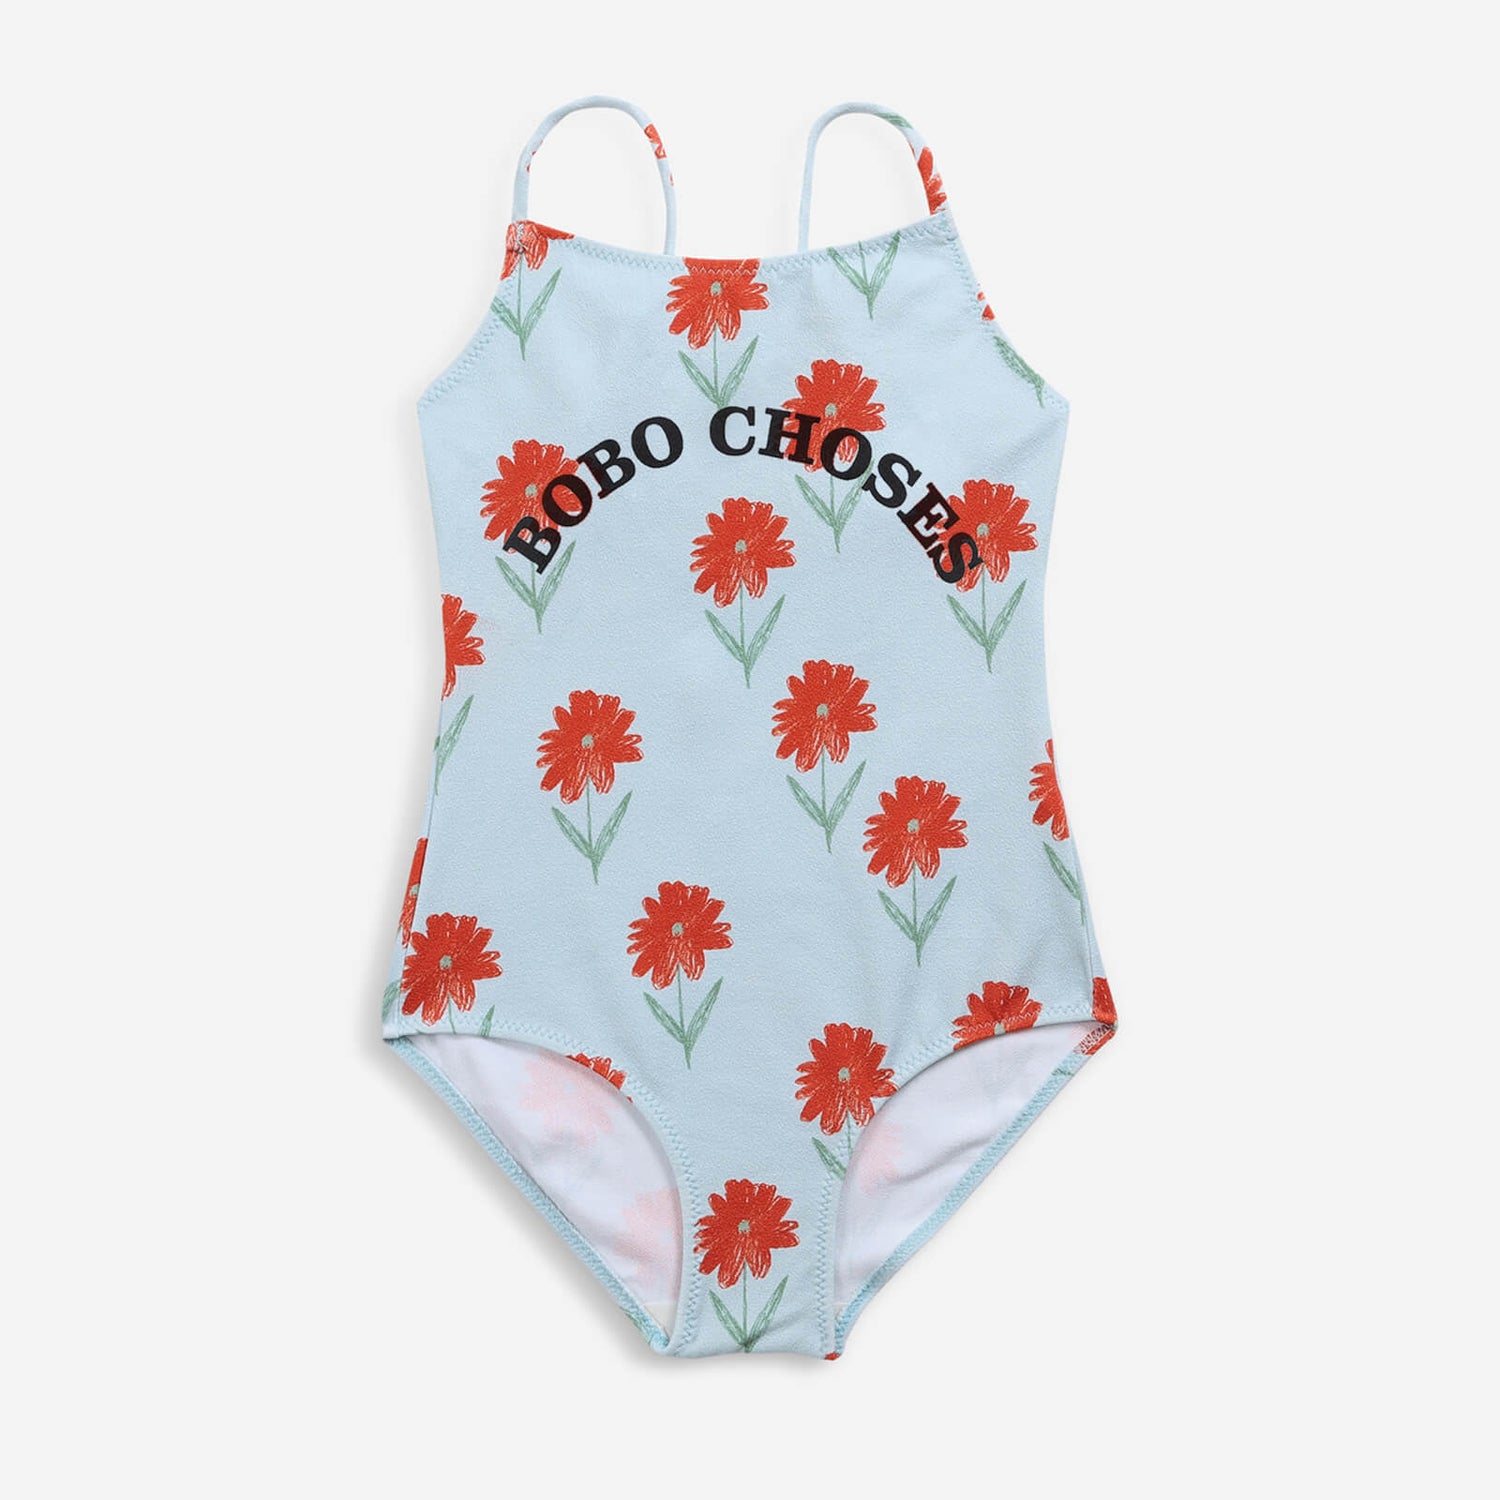 Bobo Choses Petunia All Over Swimsuit - 2-3 years